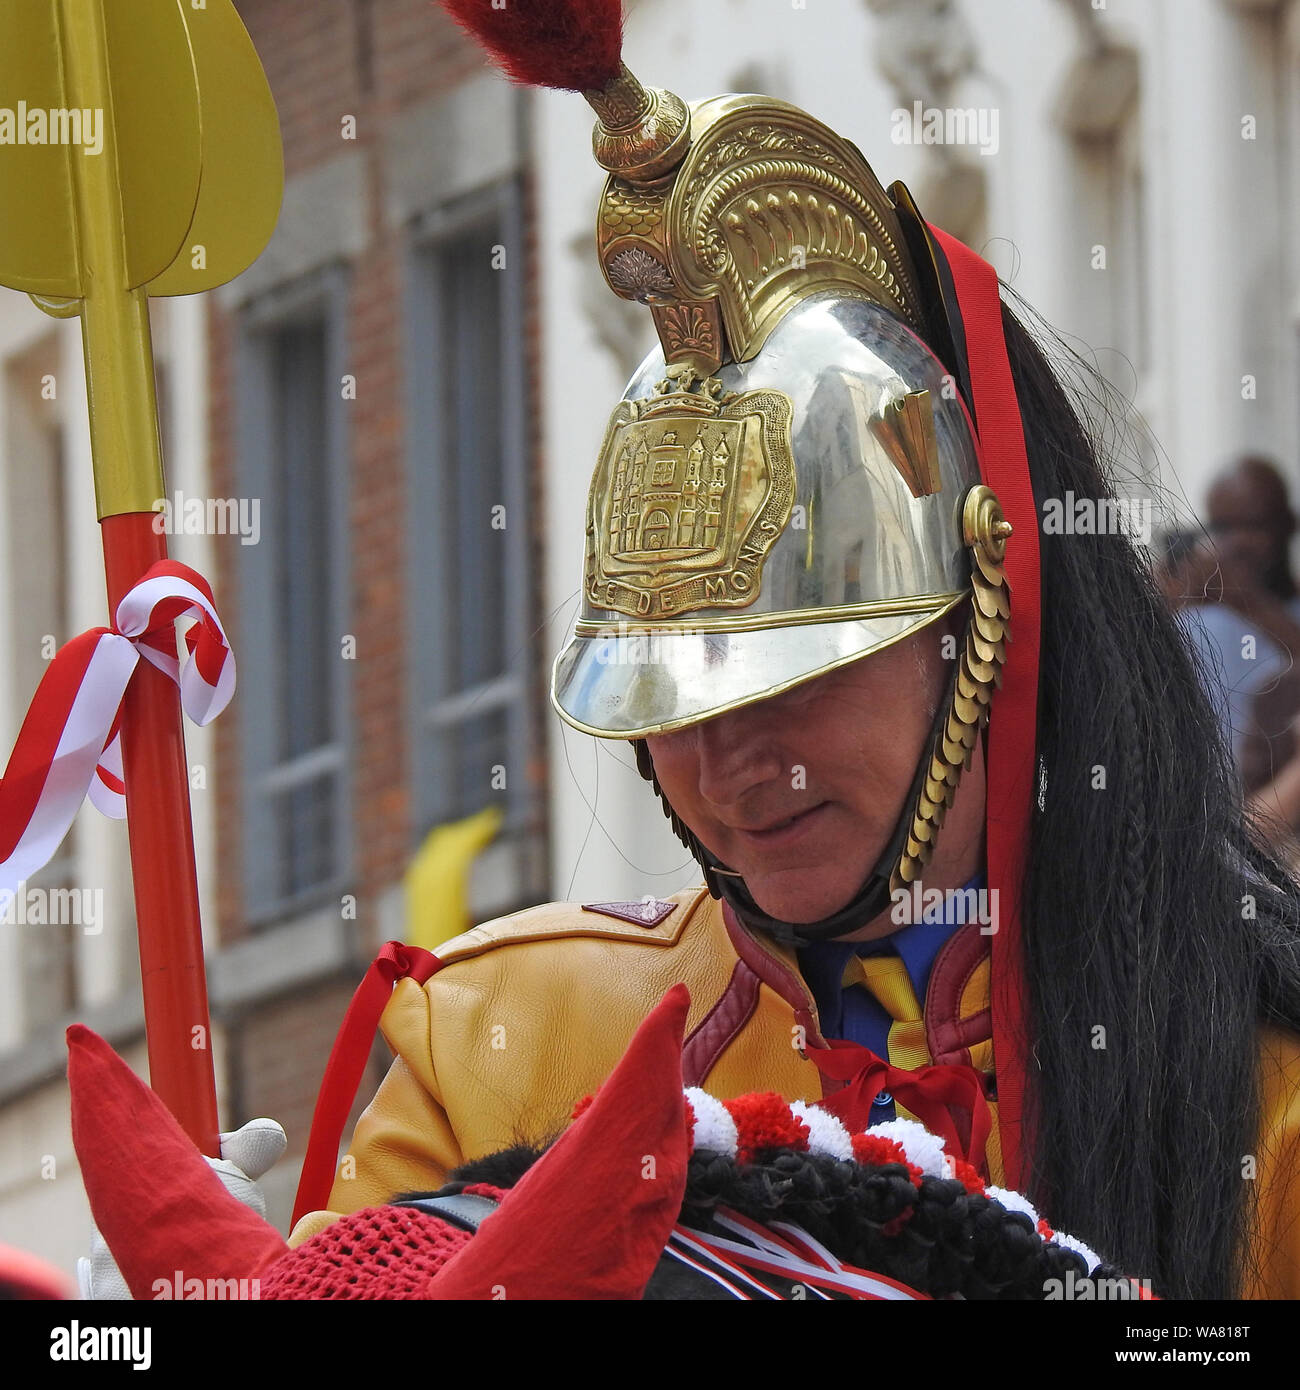 Mons, Belgium. 16 June, 2019. Participant of Ducasse and Lumeçon Game playing role of Saint George in helmet decorated with Coat of Arms of Mons Stock Photo